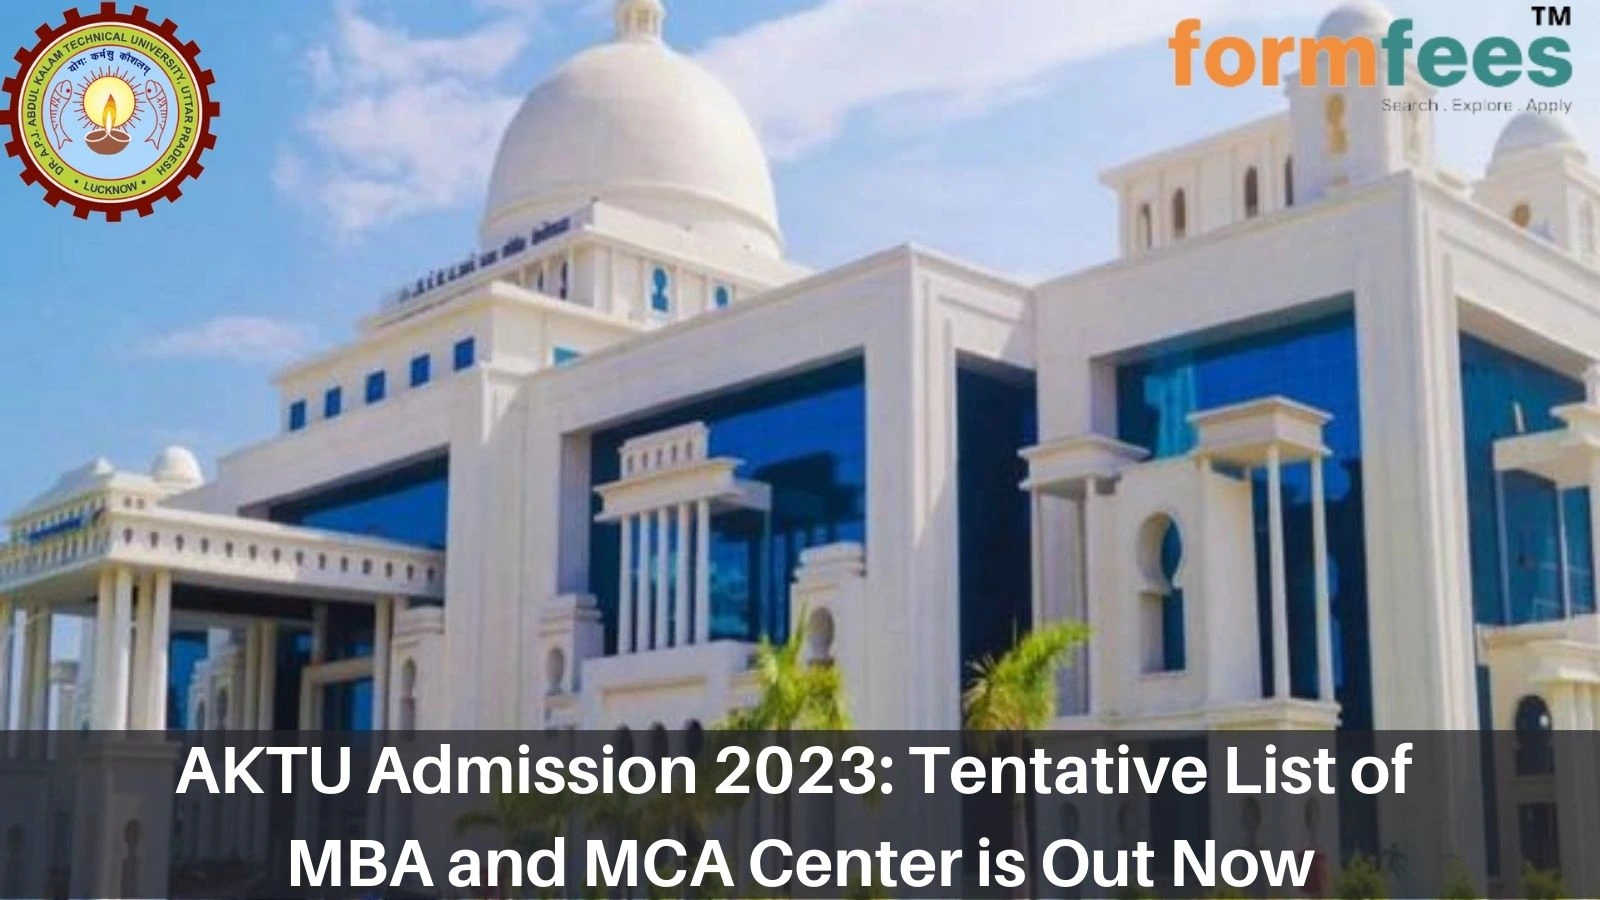 AKTU Admission 2023: Tentative List of MBA and MCA Center is Out Now